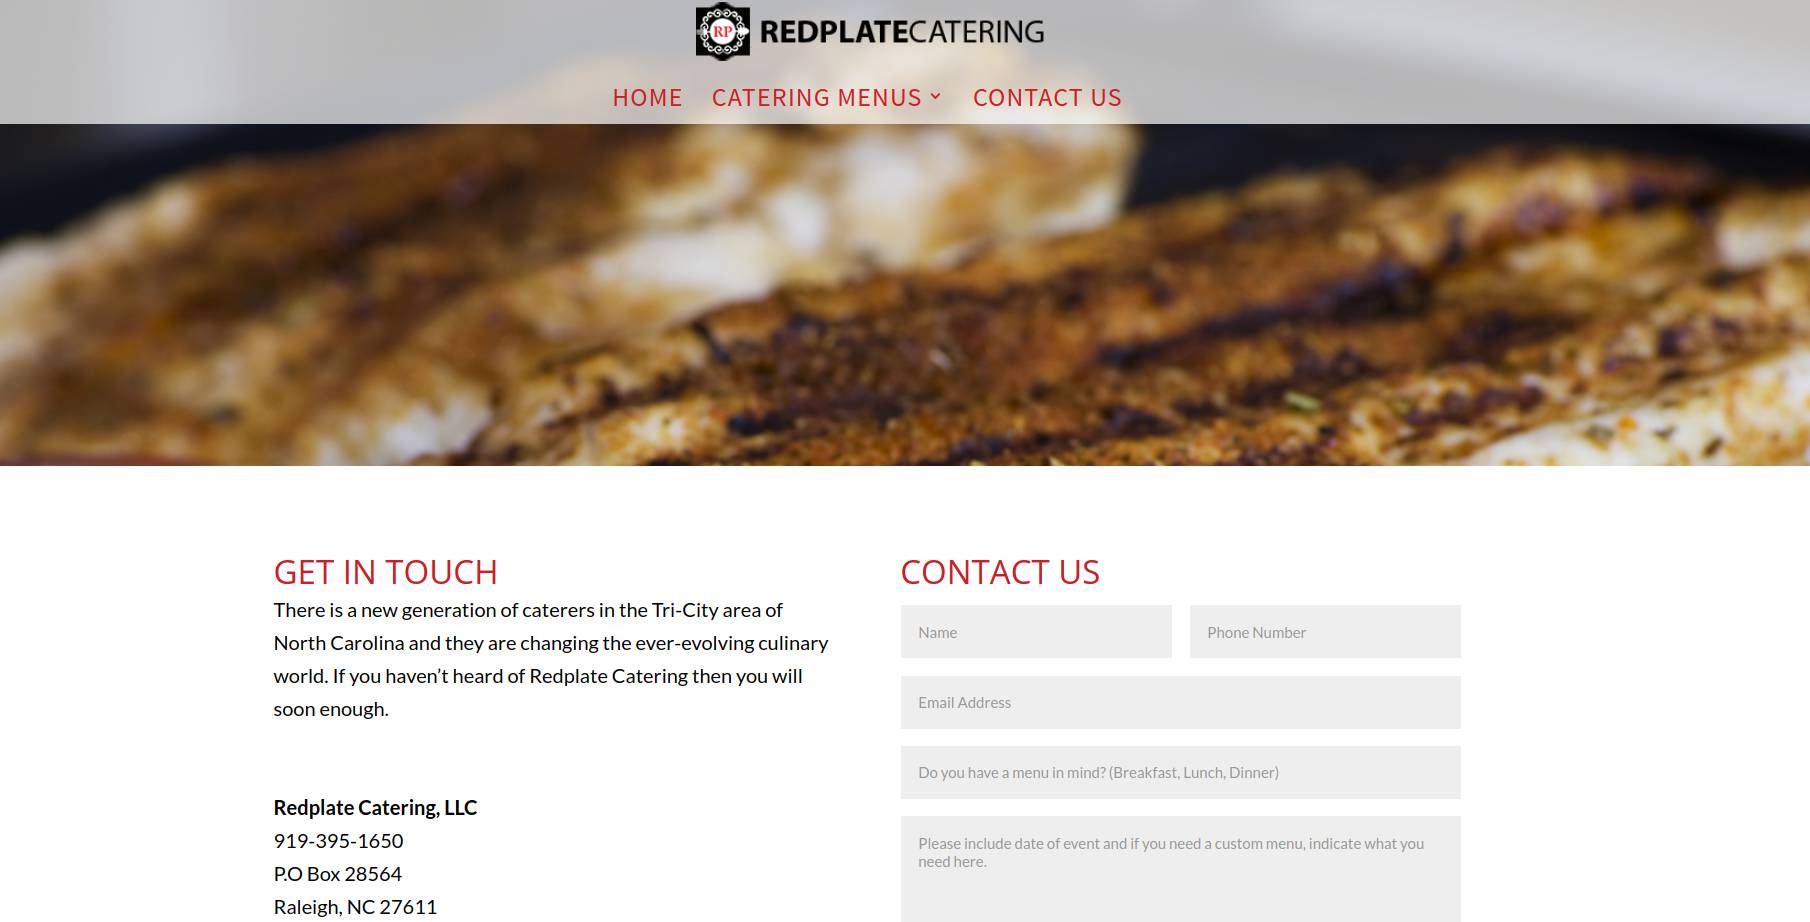 redplate-catering-raleigh-nc-contact